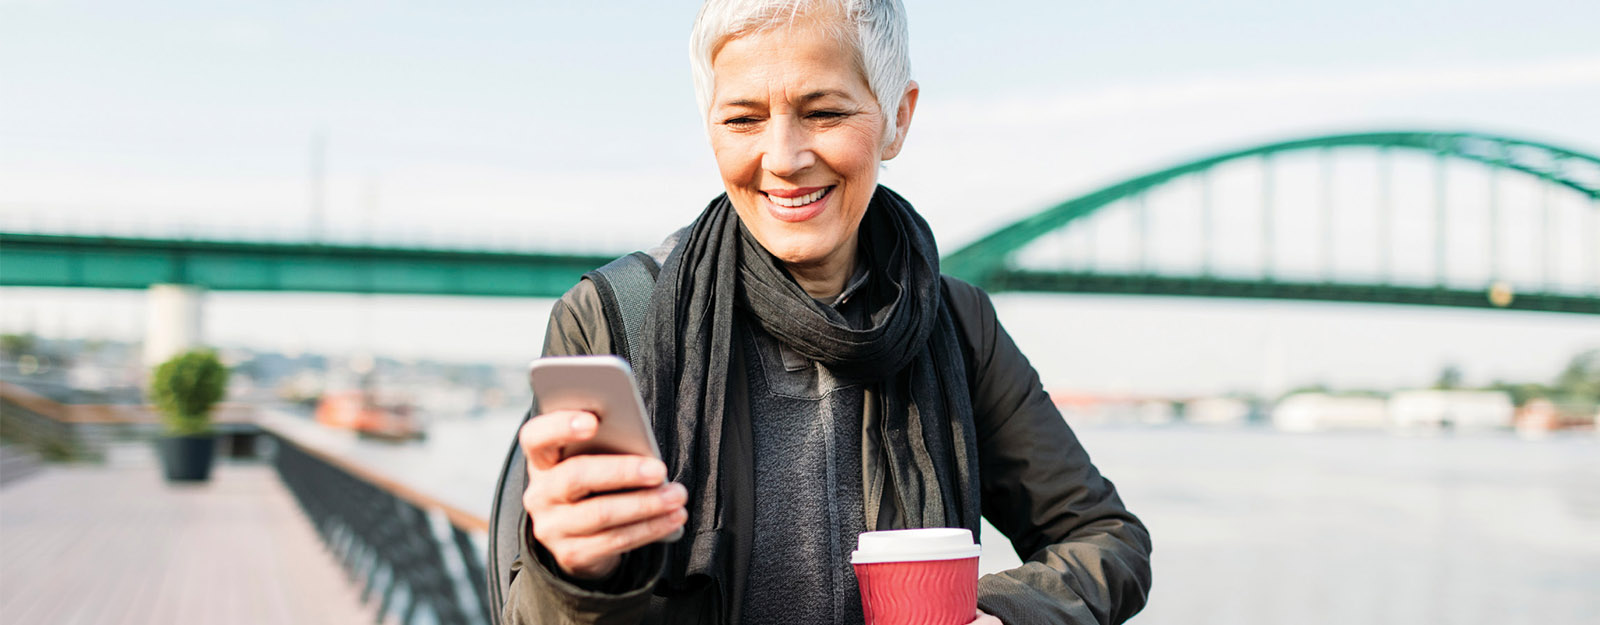 Image of woman site seeing while looking at her phone and holding a coffee.